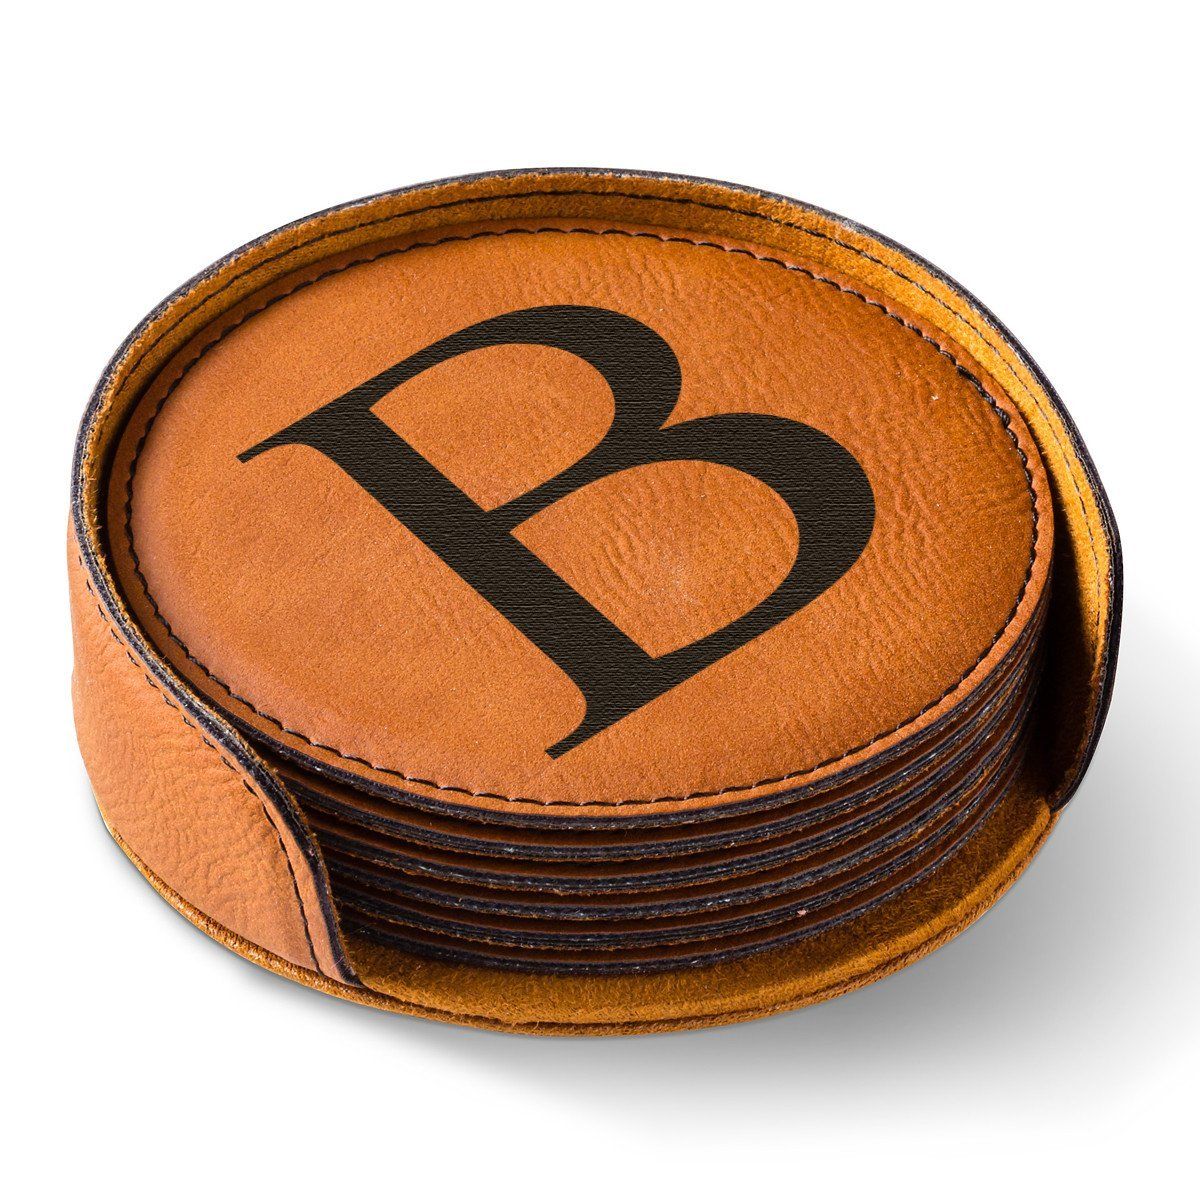 Personalized Round Leatherette Coaster Set - Available in Black, Dark Brown, Light Brown, and Rawhide